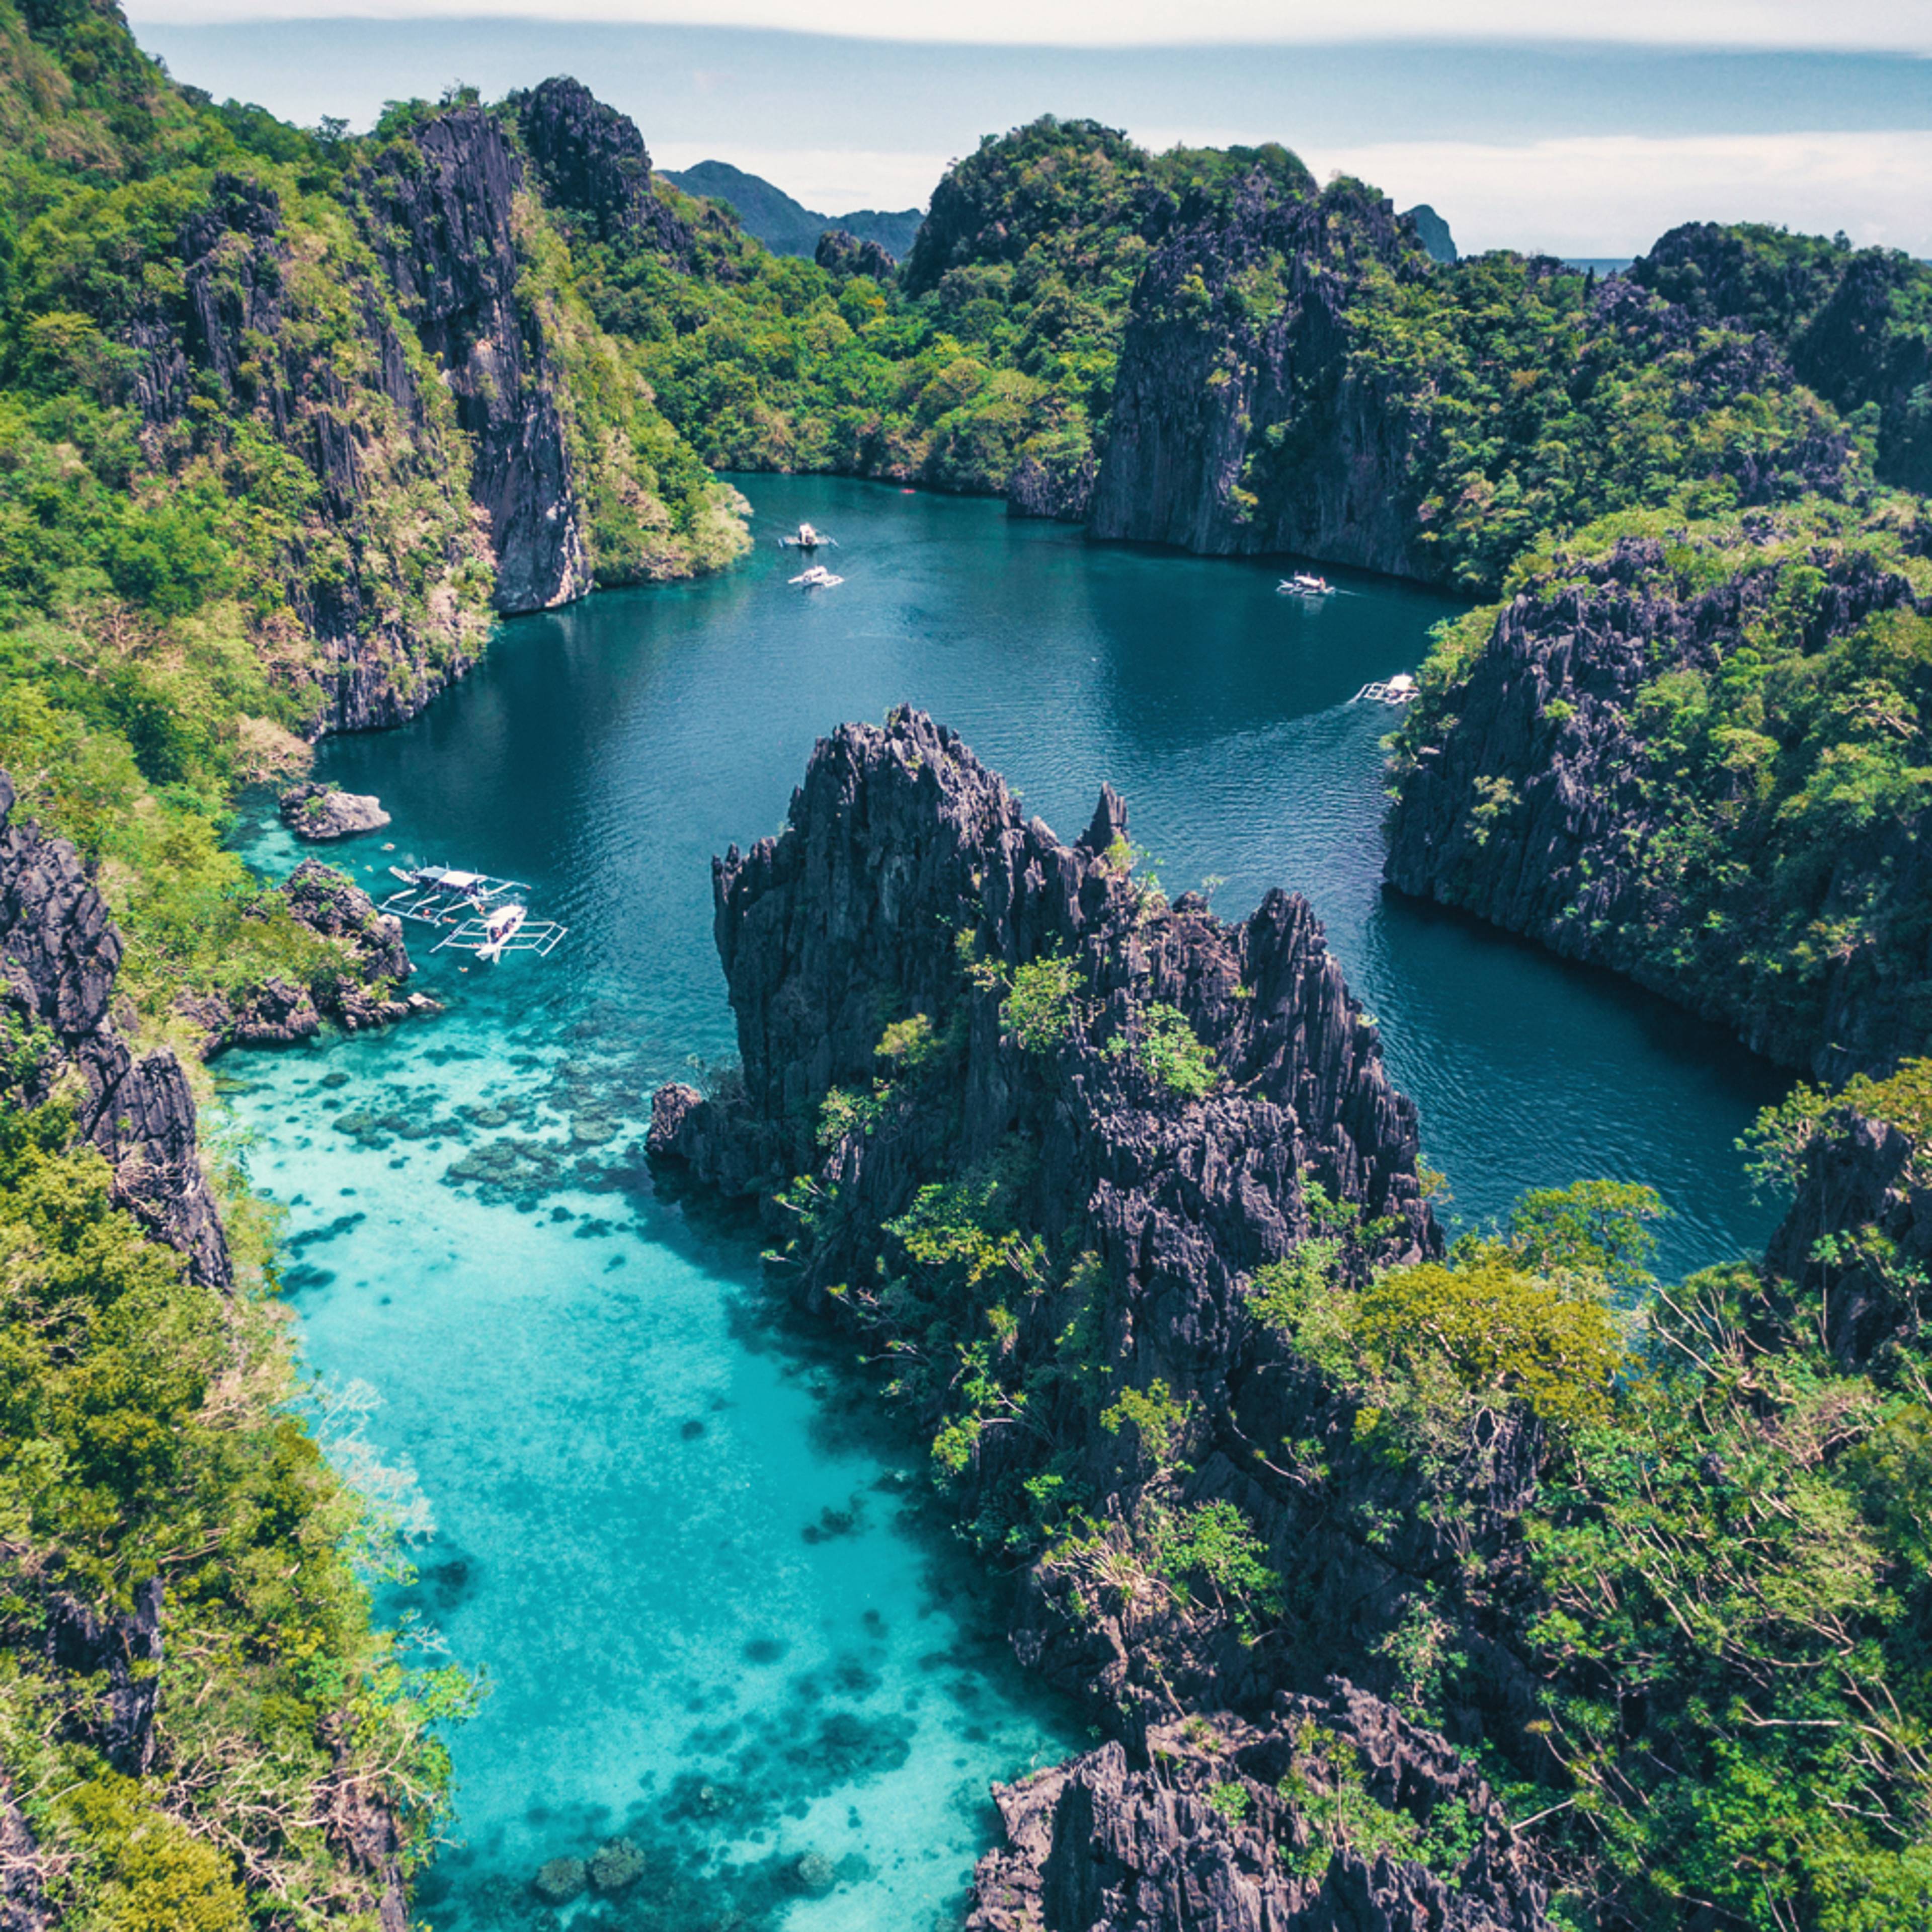 Design your perfect island vacation in the Philippines with a local expert